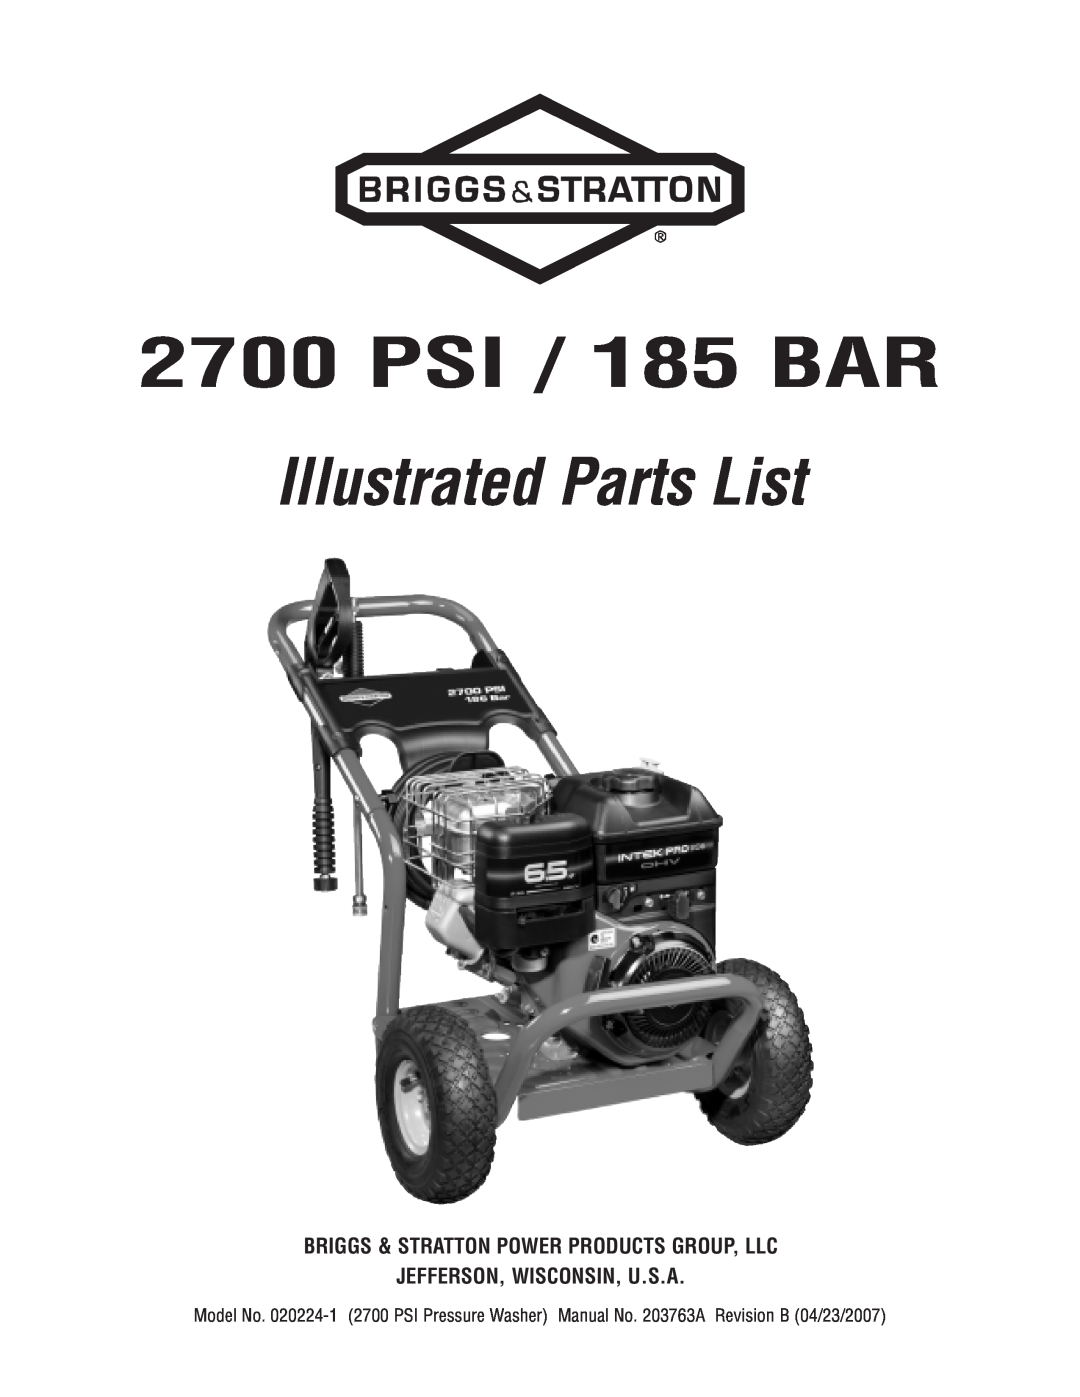 Briggs & Stratton 020224-1 manual PSI / 185 BAR, Illustrated Parts List, Briggs & Stratton Power Products Group, Llc 